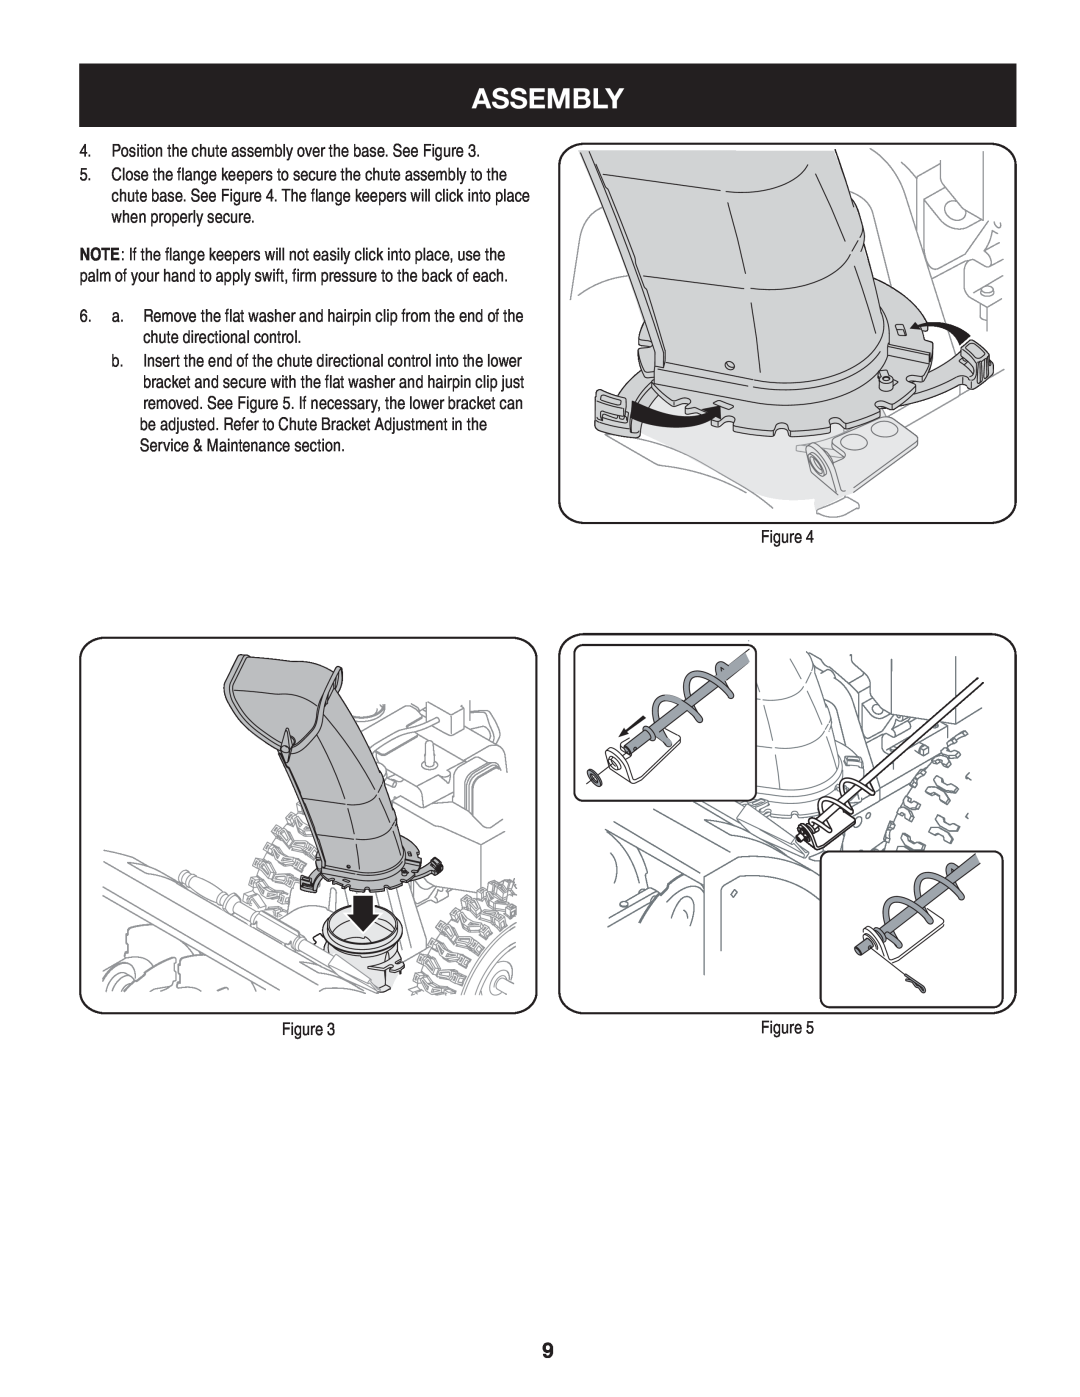 Craftsman 247.8819 operating instructions Assembly, Figure 